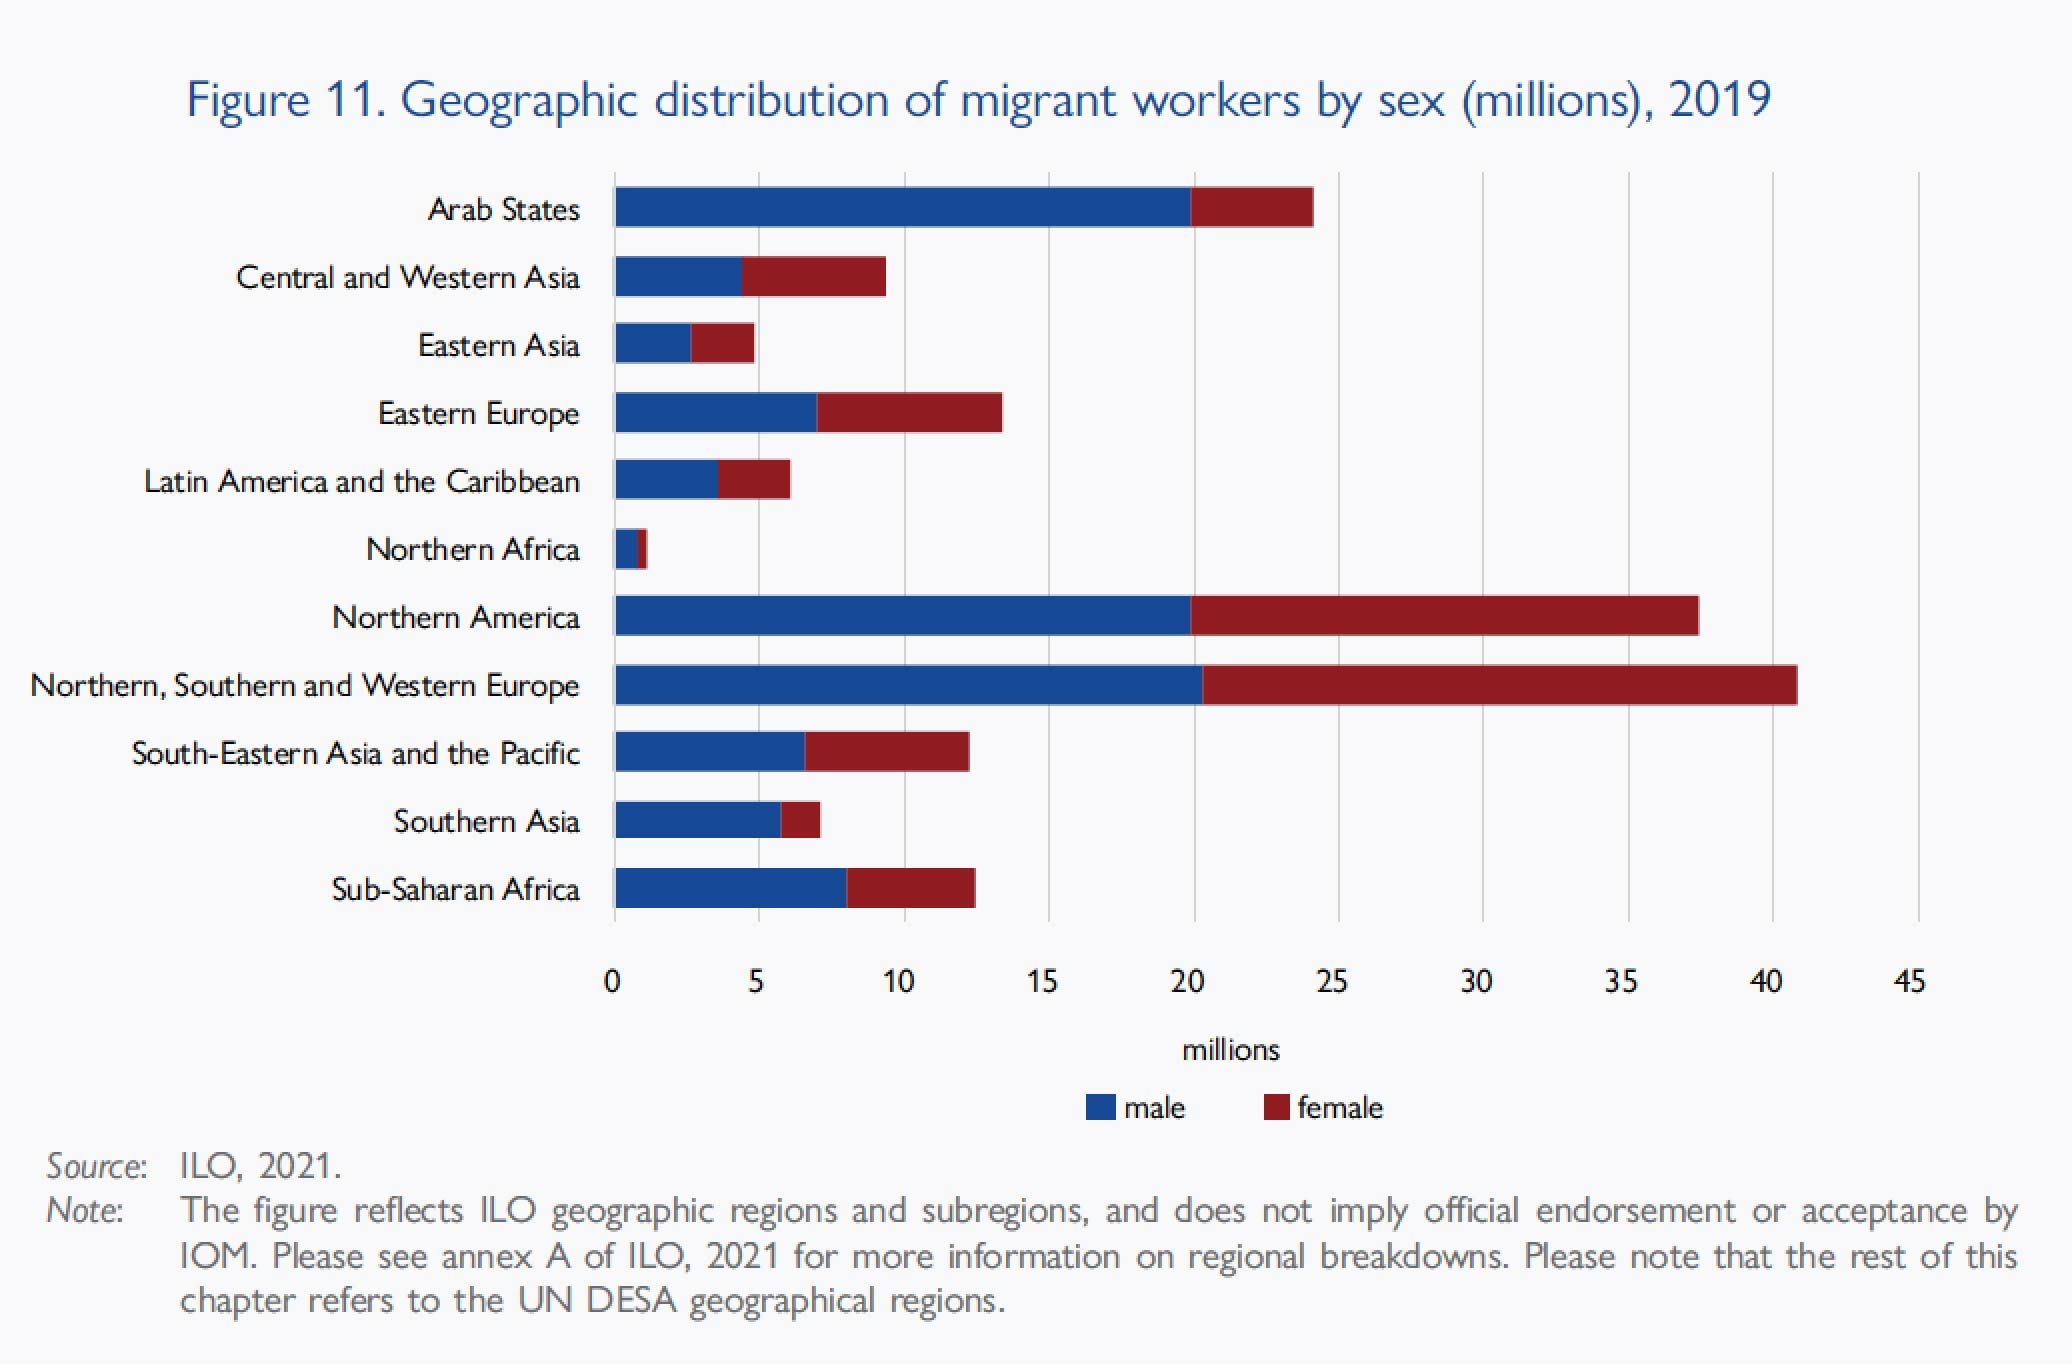 Geographic distribution of migrant workers by sex